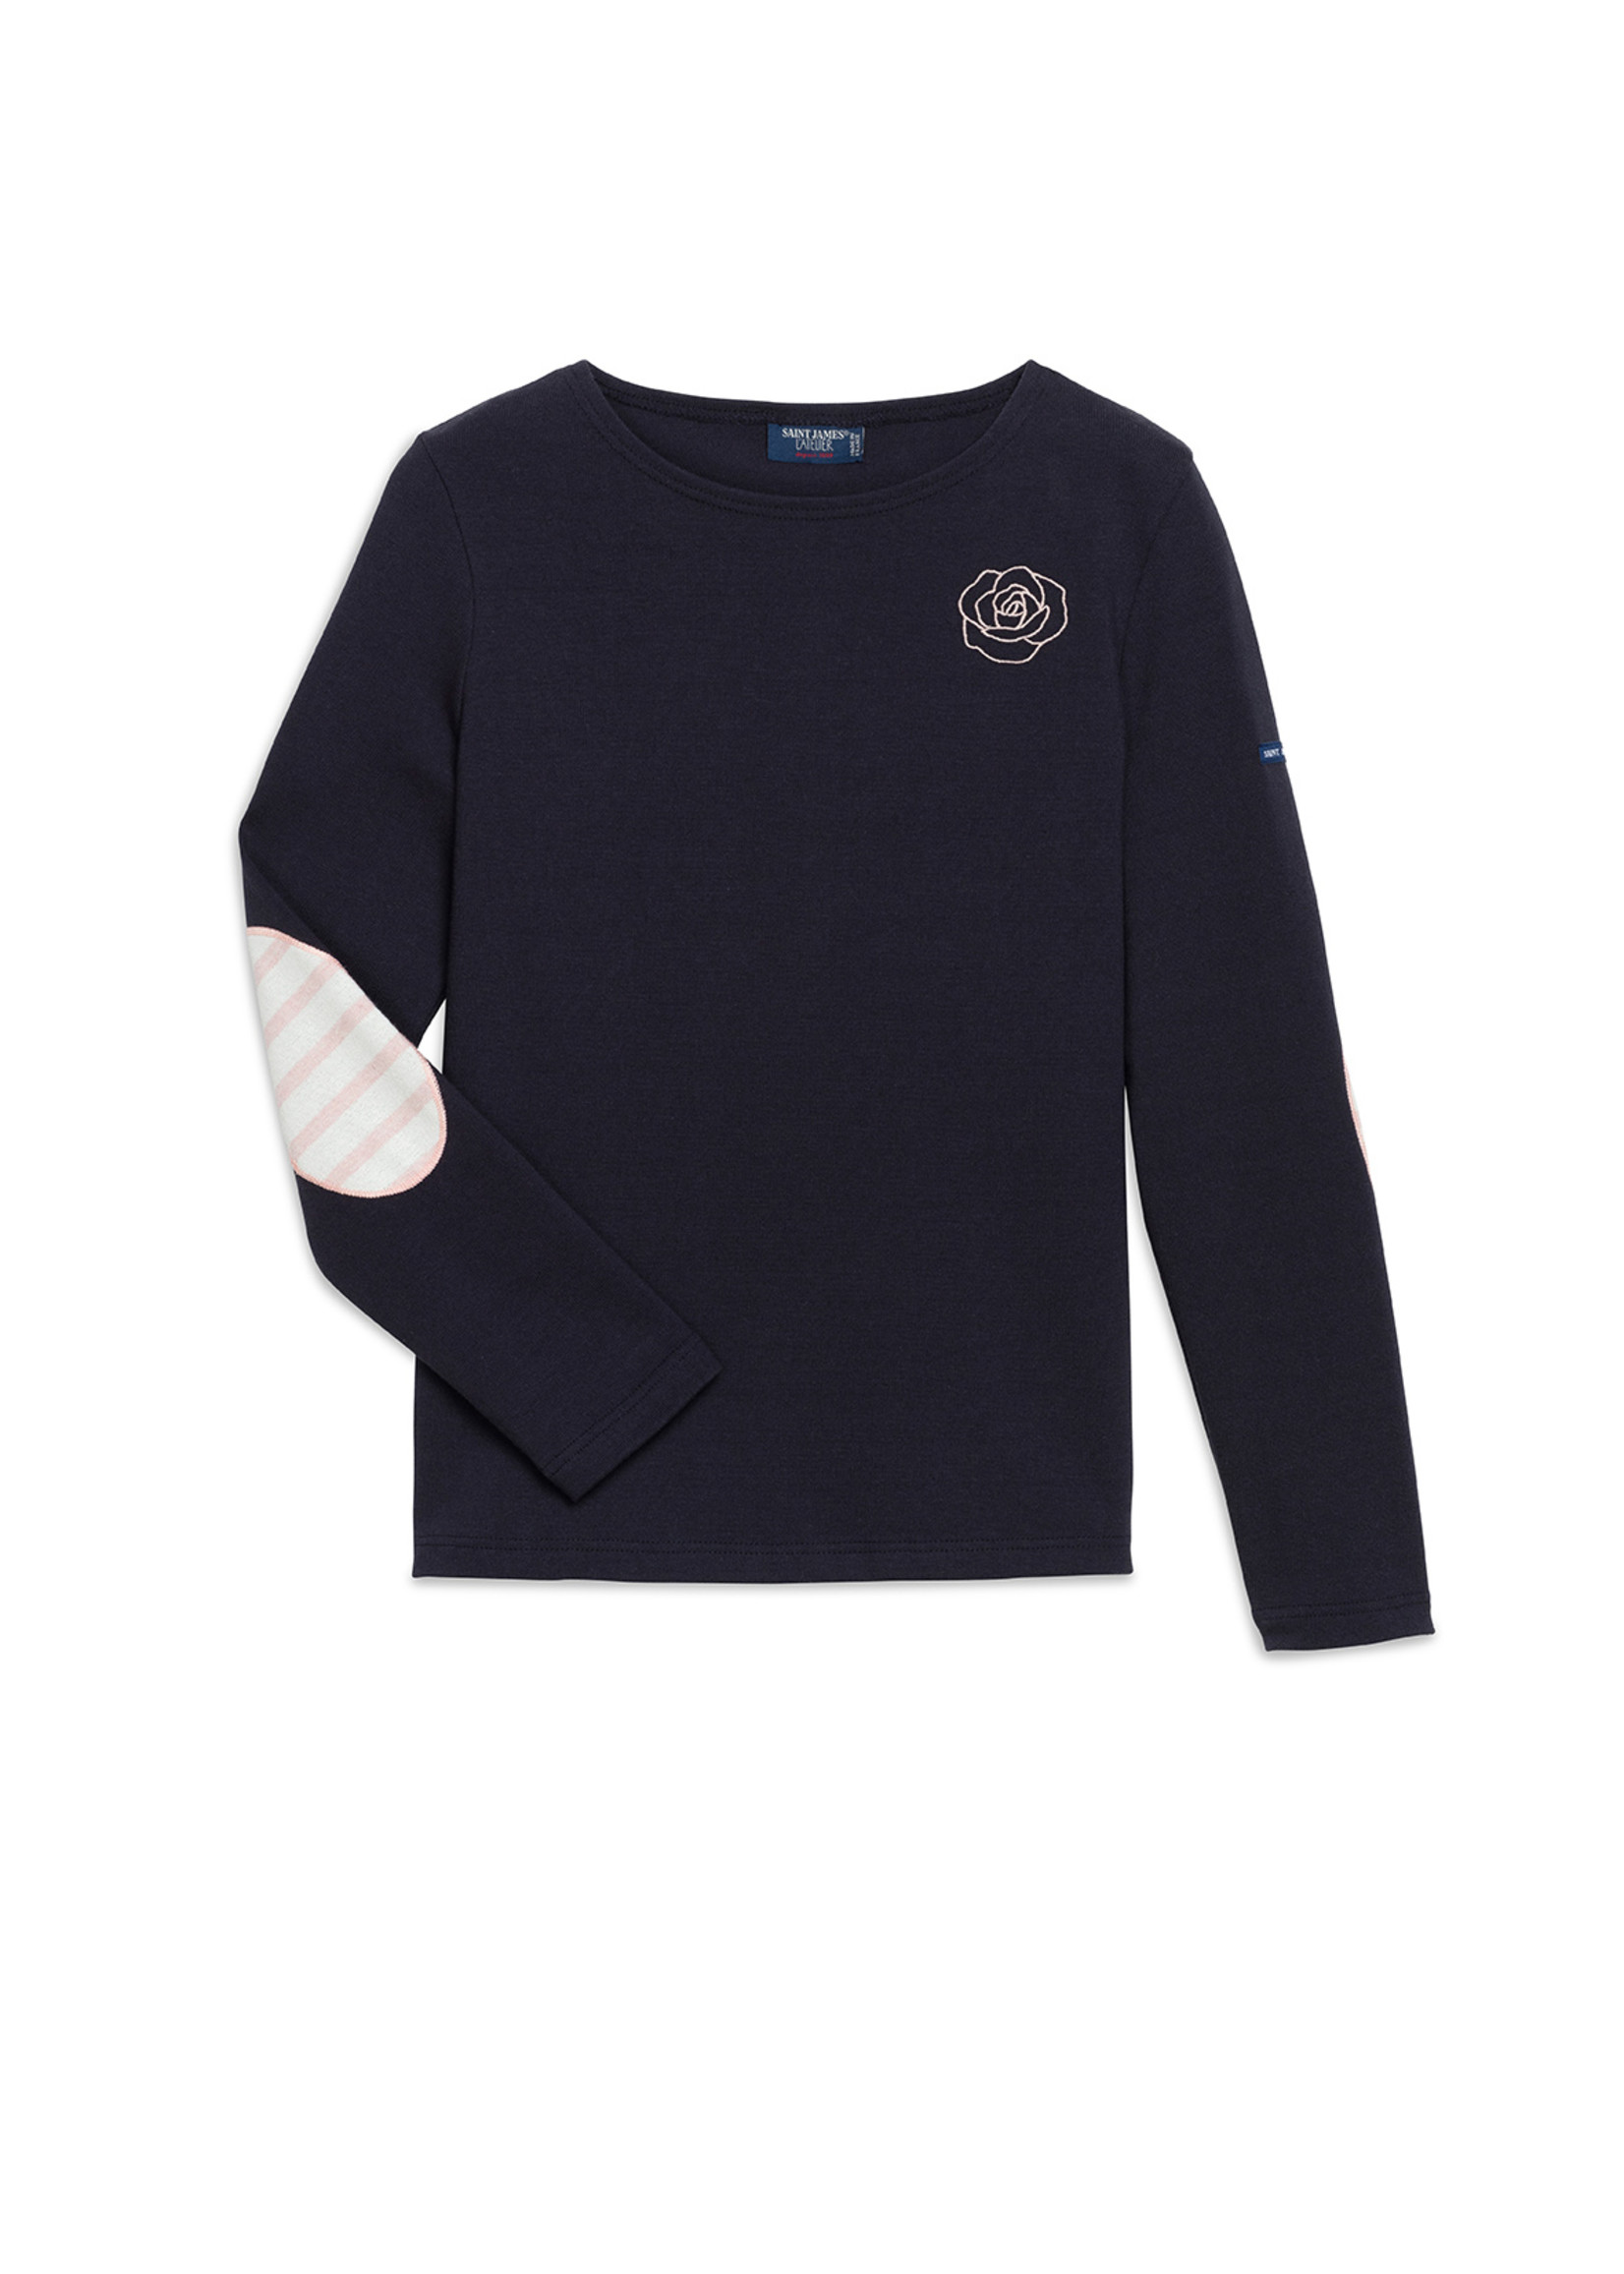 Saint James Navy Top with Elbow Patches